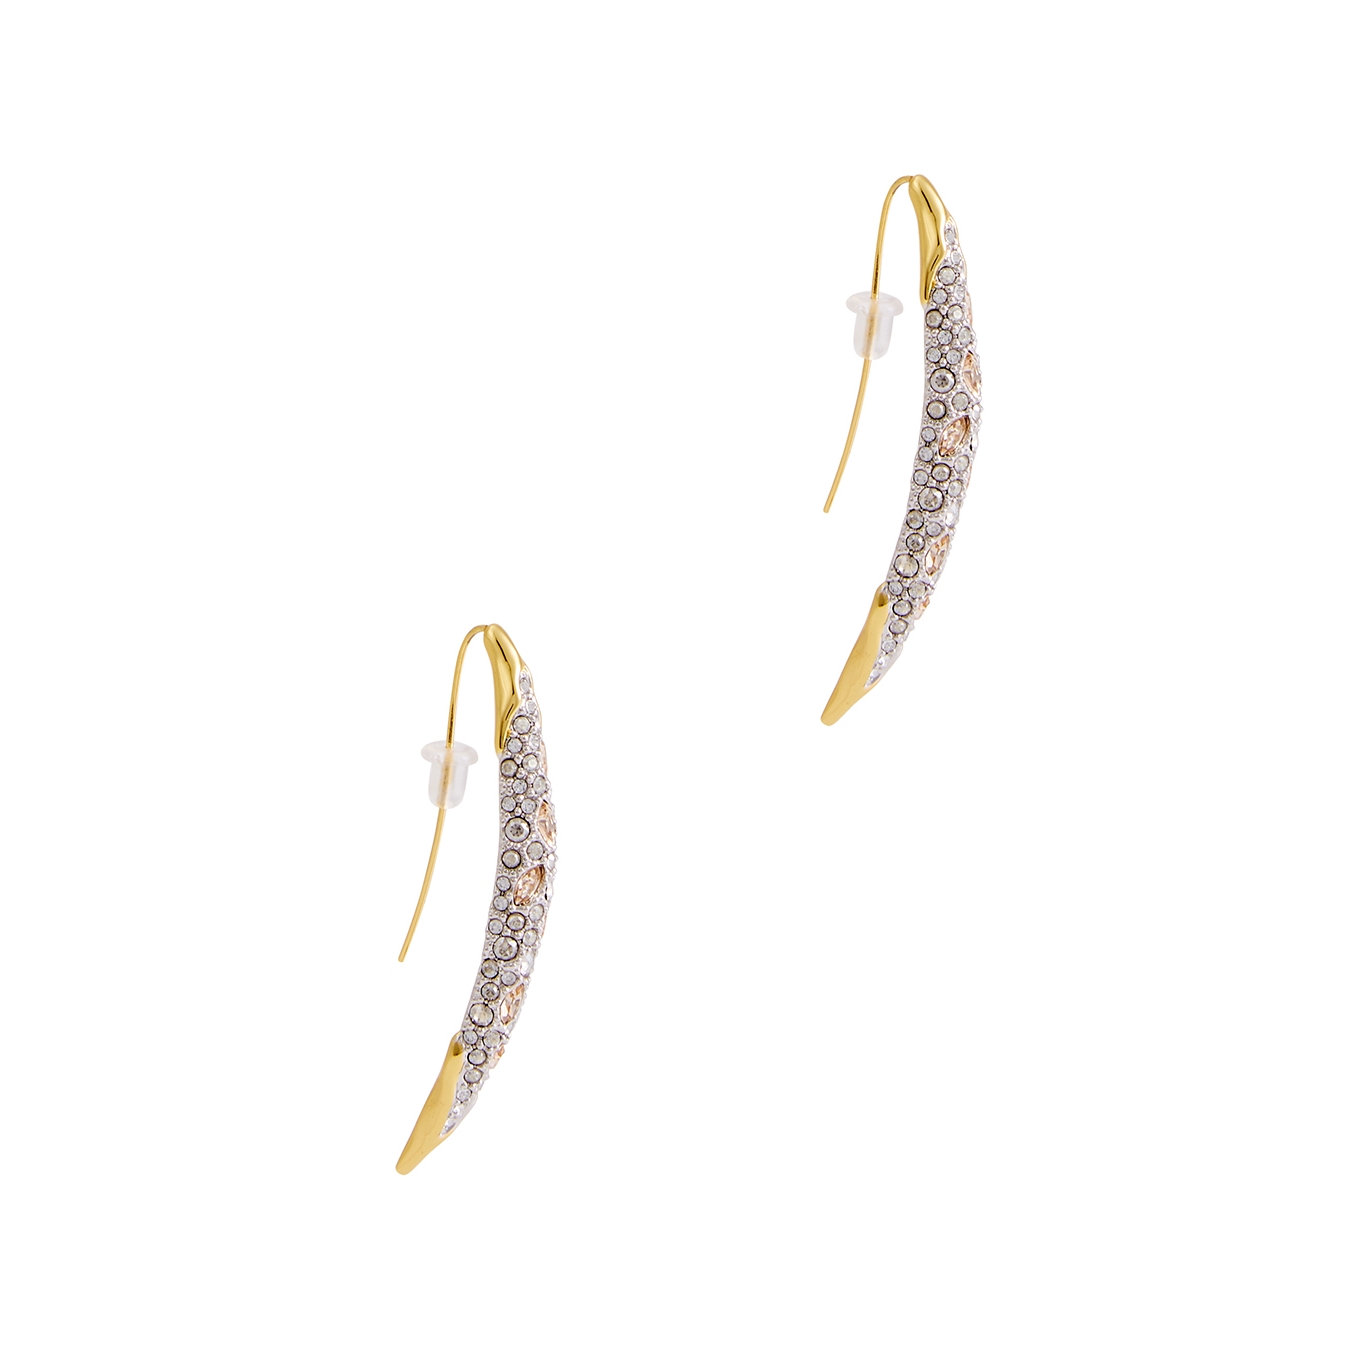 Alexis Bittar Solanales Embellished 14kt Gold-plated Drop Earrings - Crystal - One Size